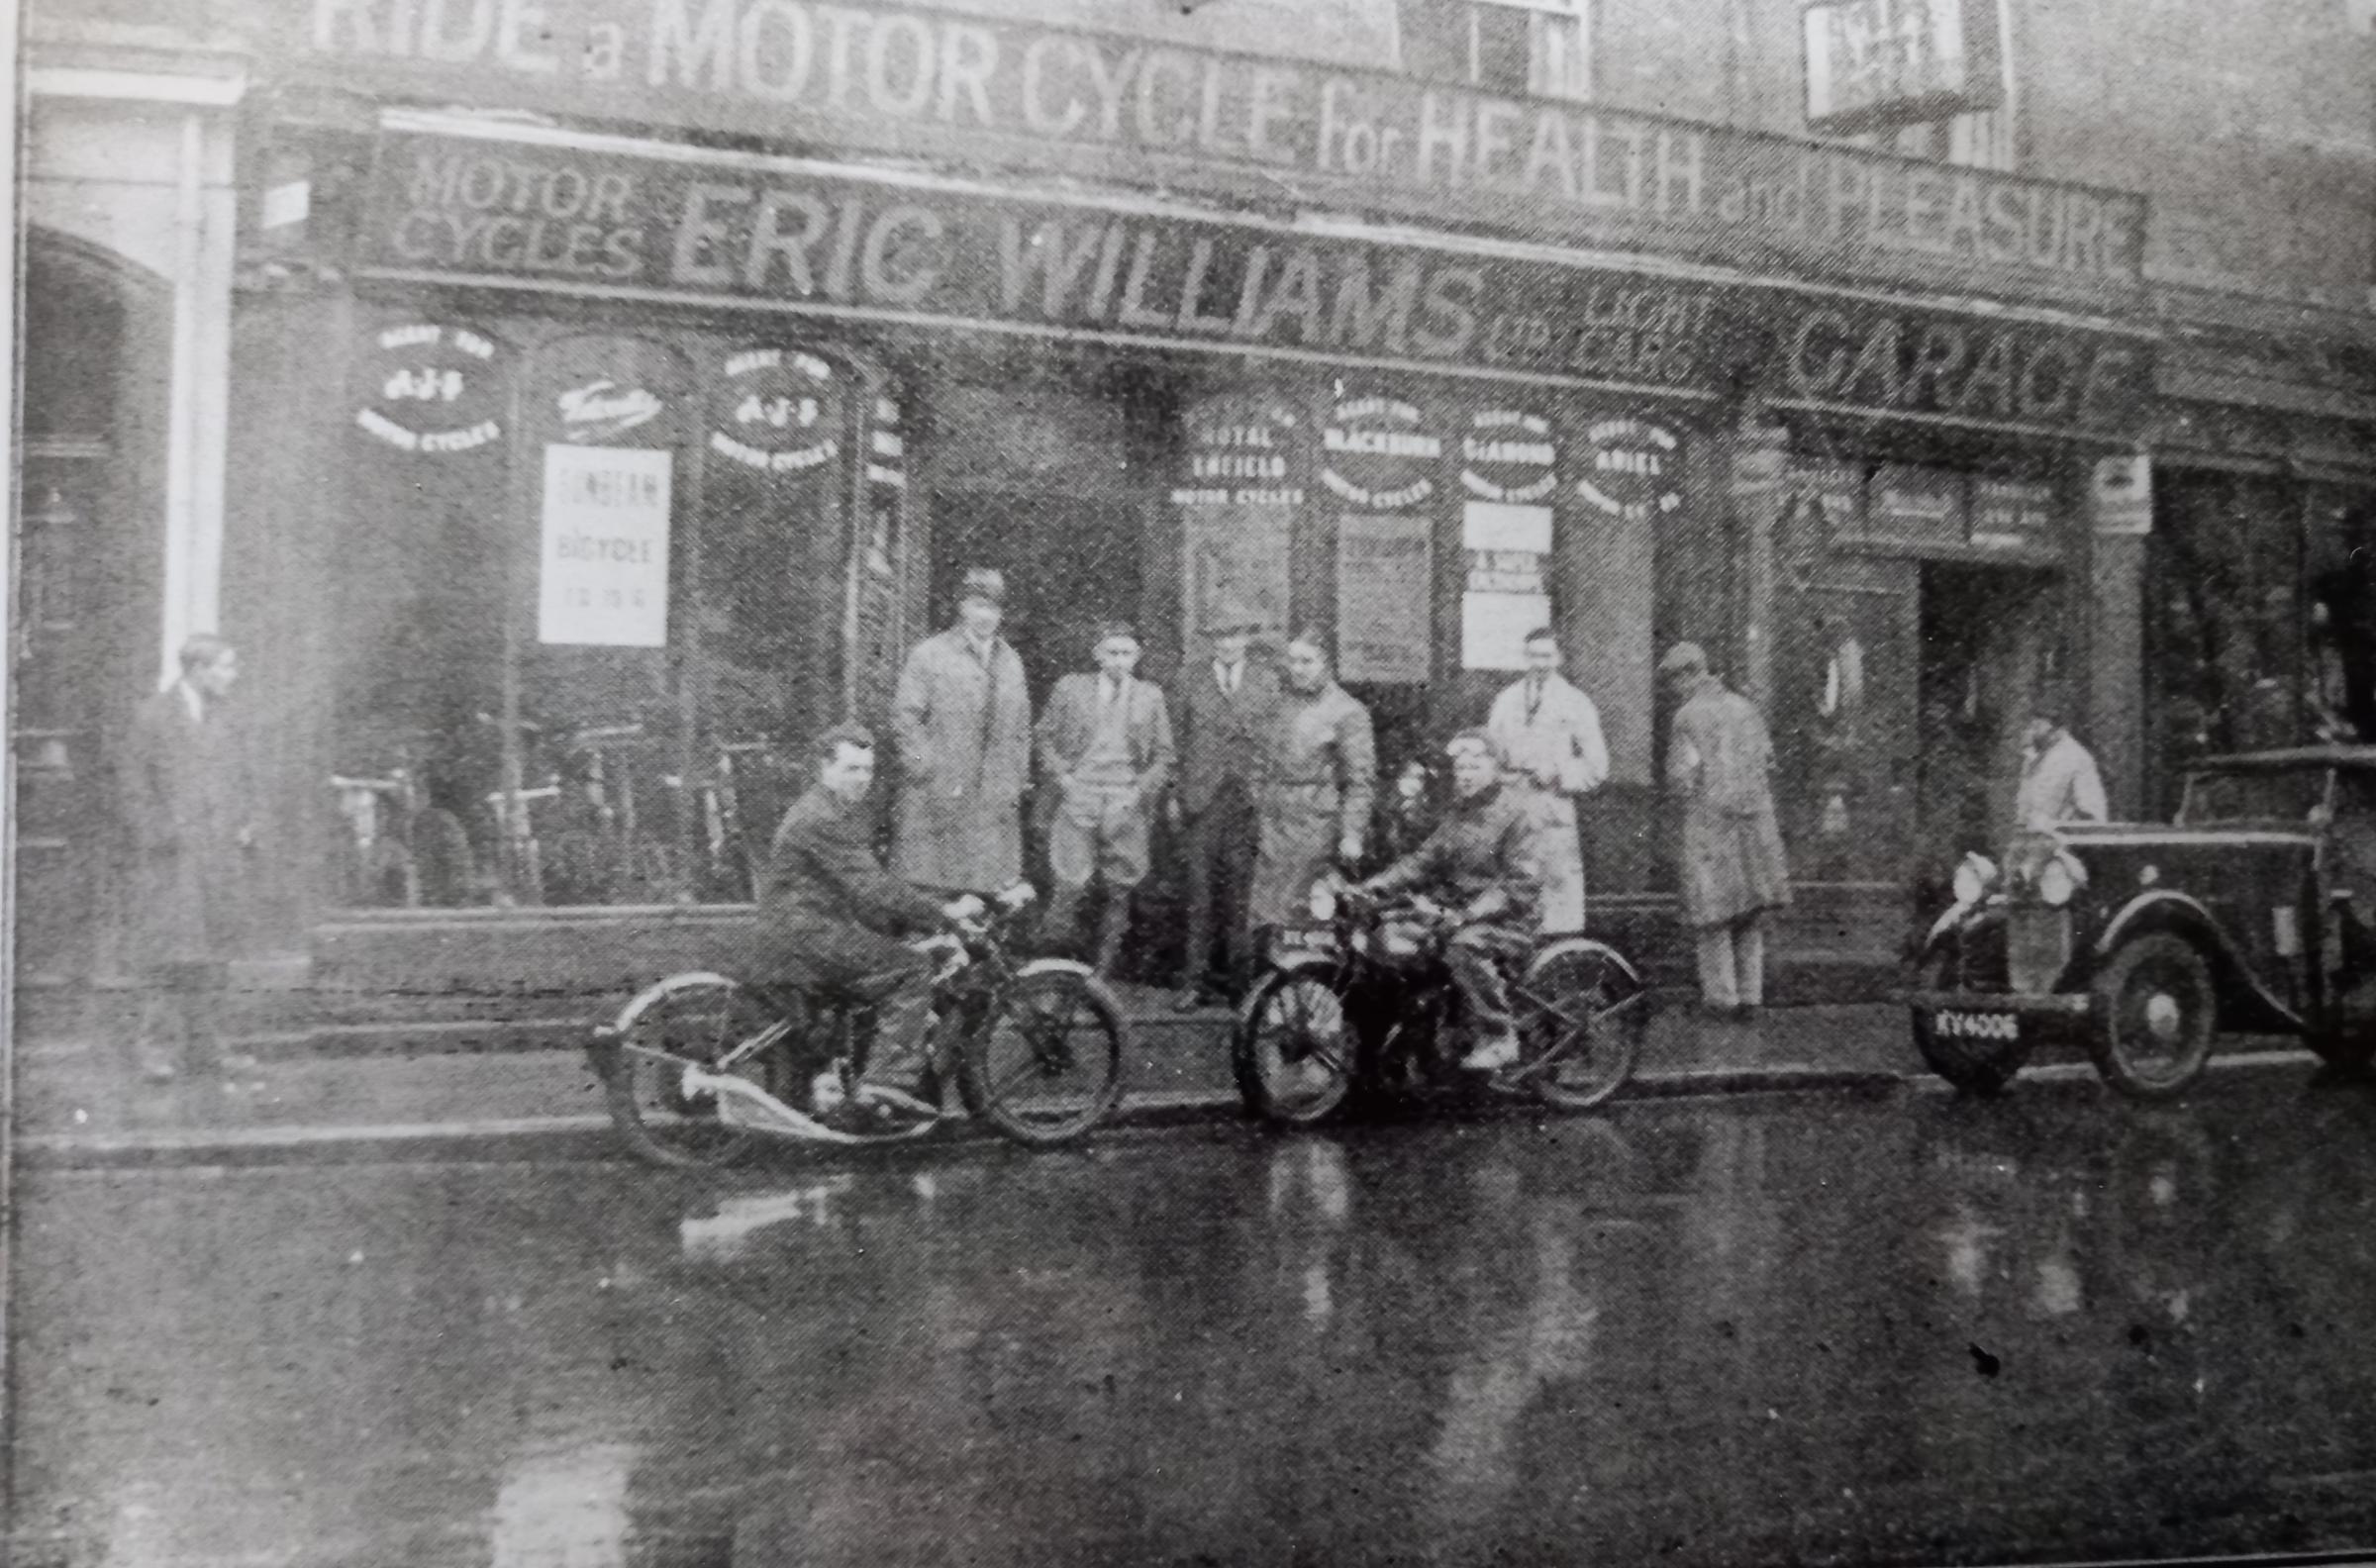 REVVED-UP: The boys are back in town. The arrival of the Triumph Baby Motorcycle in Worcester at Eric Williams garage in Pierpoint Street in the 1950s. A decade later, in the Sixties, it would have been called “really gear”. Street talk for